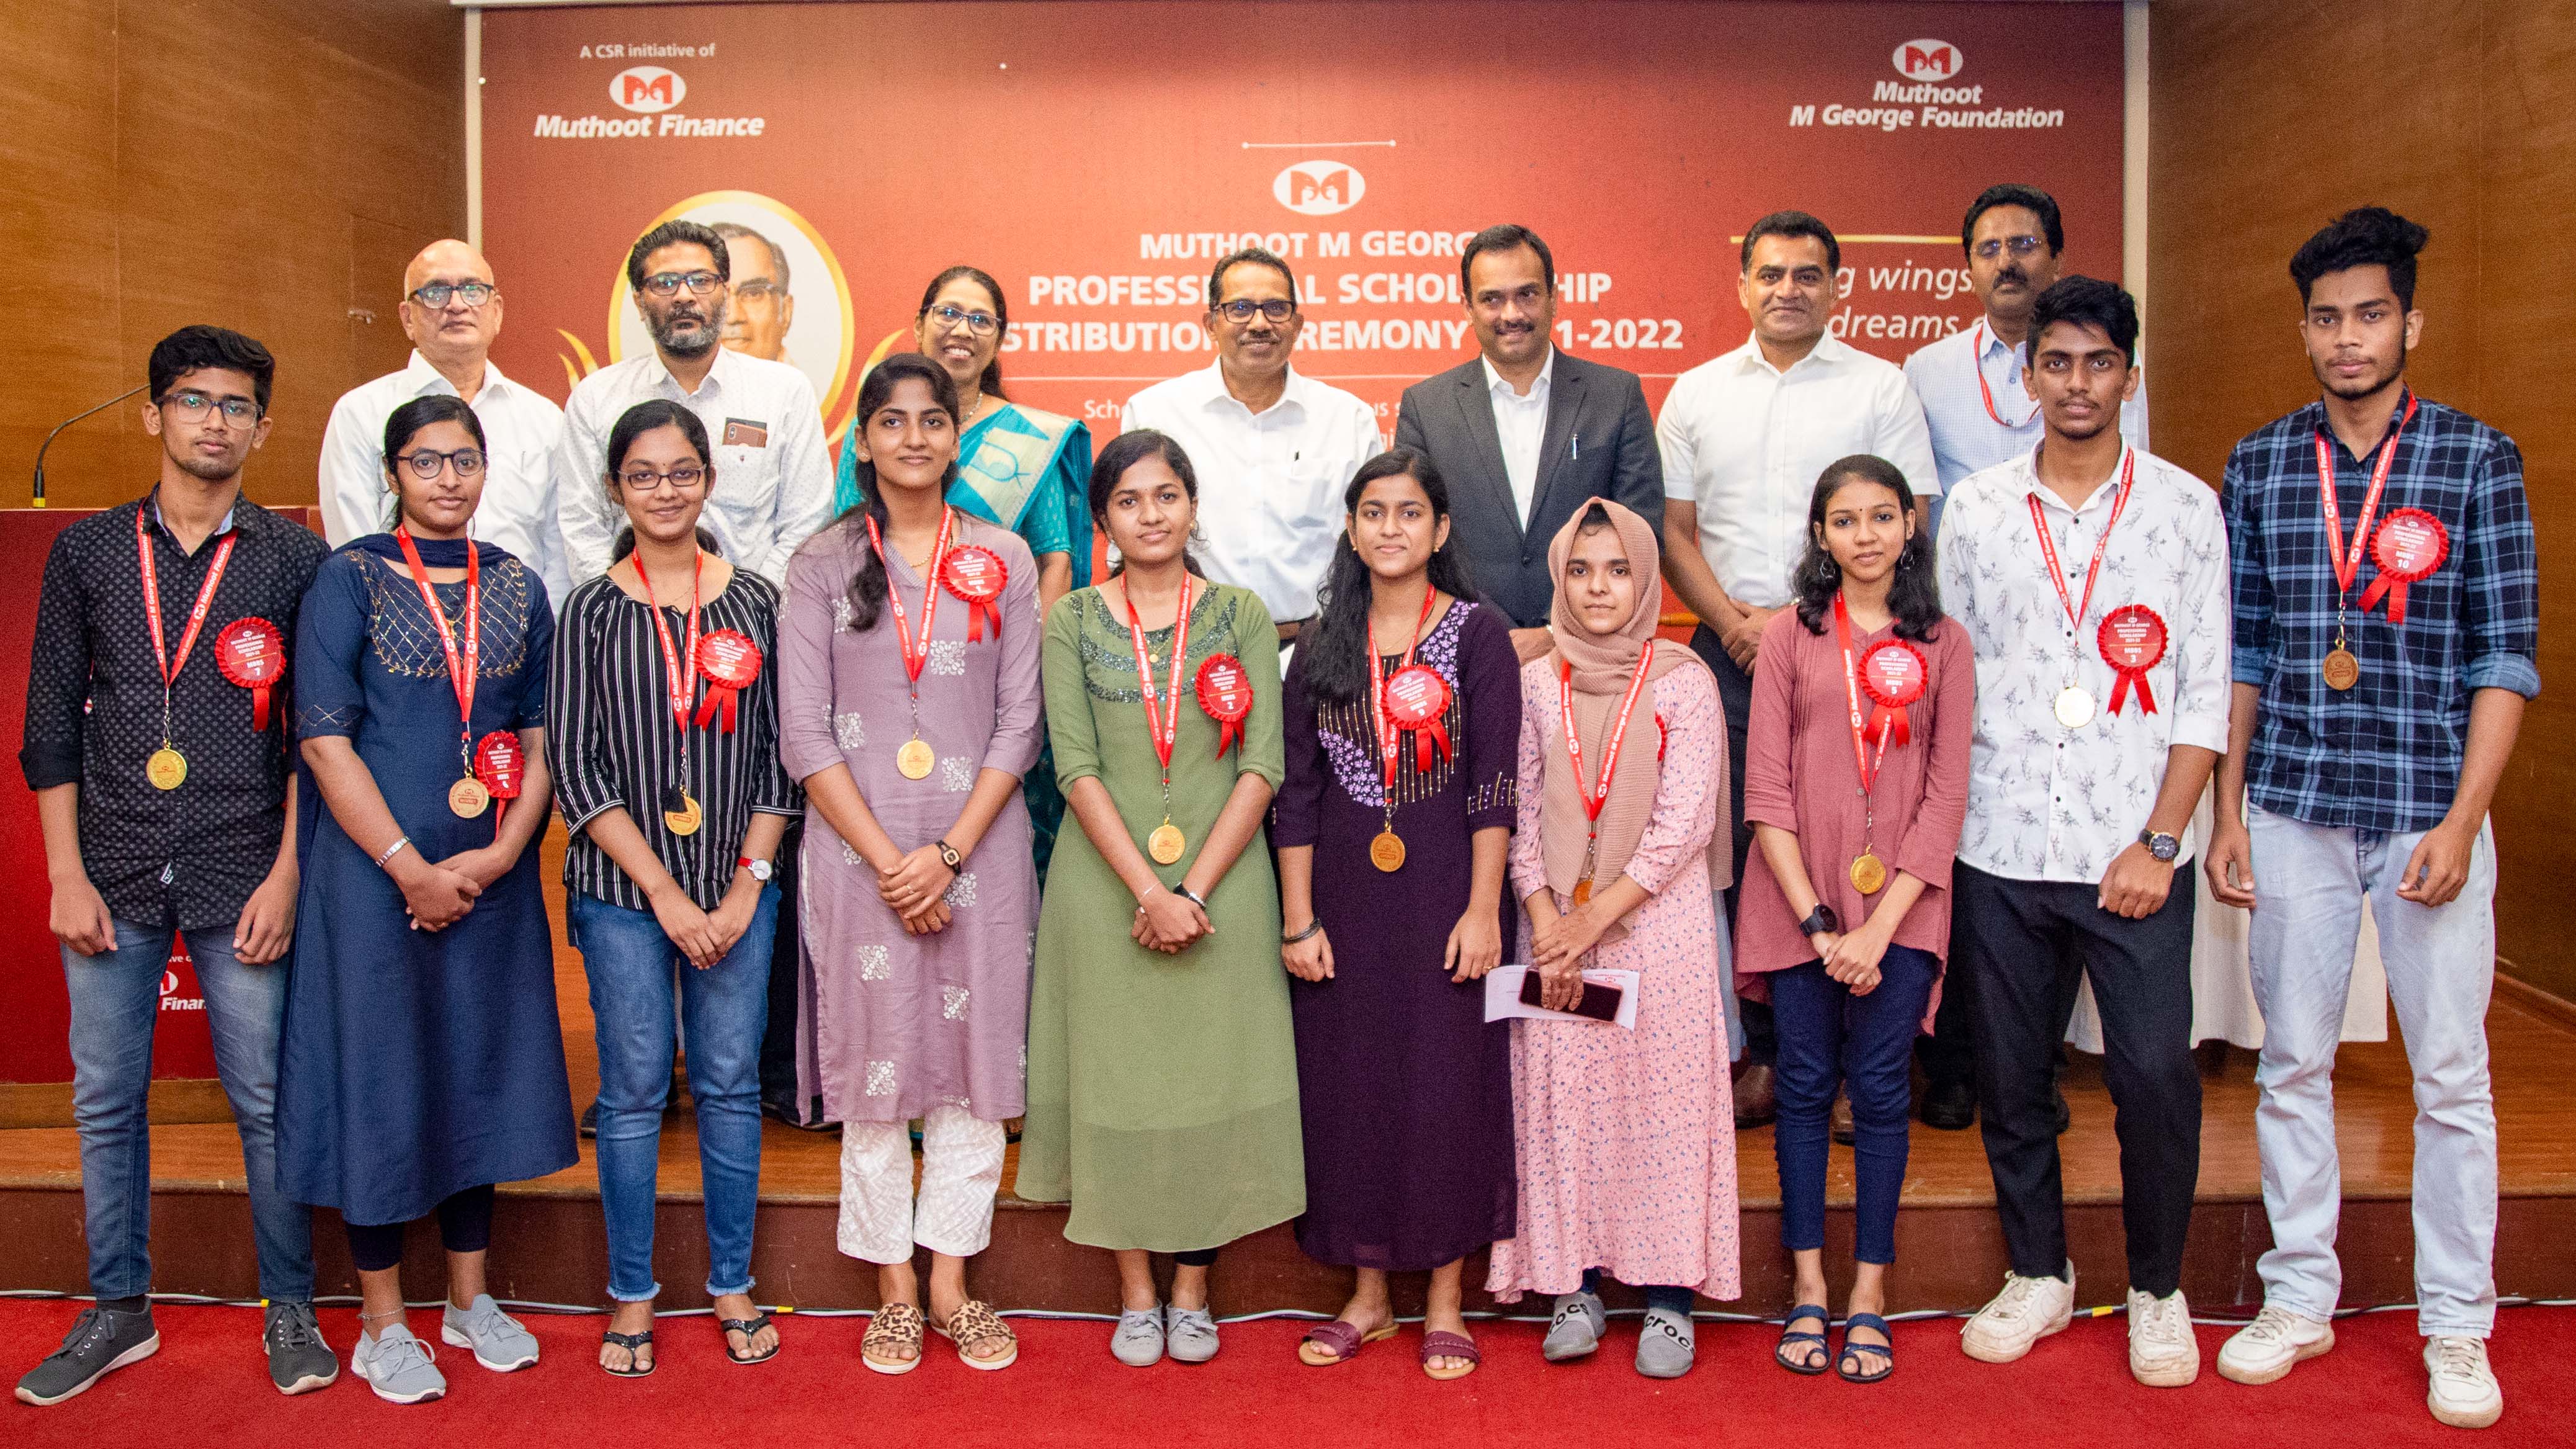 Muthoot Finance facilitates students with scholarships to support their higher education